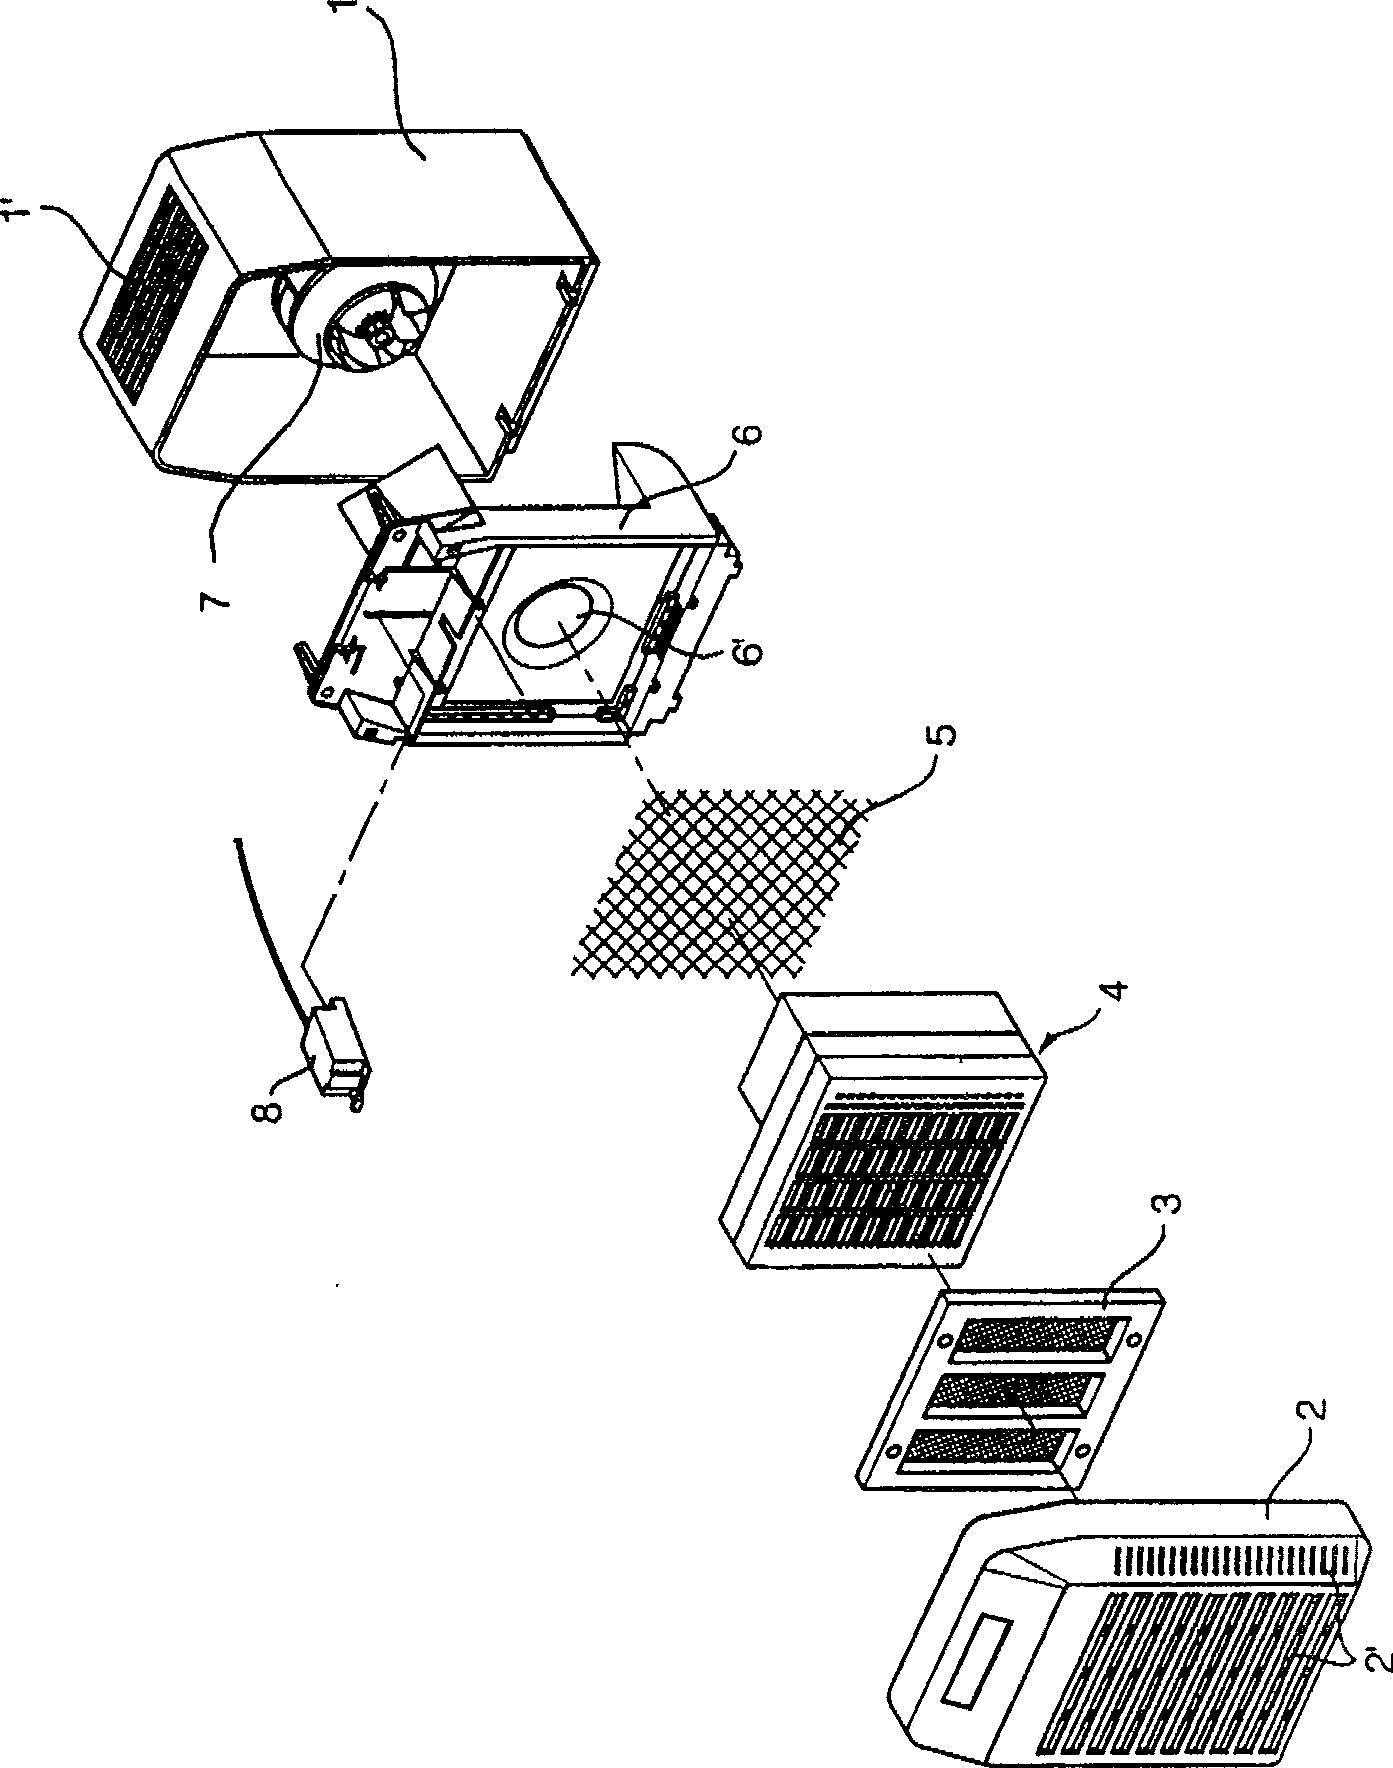 Electronic dust-collecting filter of air purifier